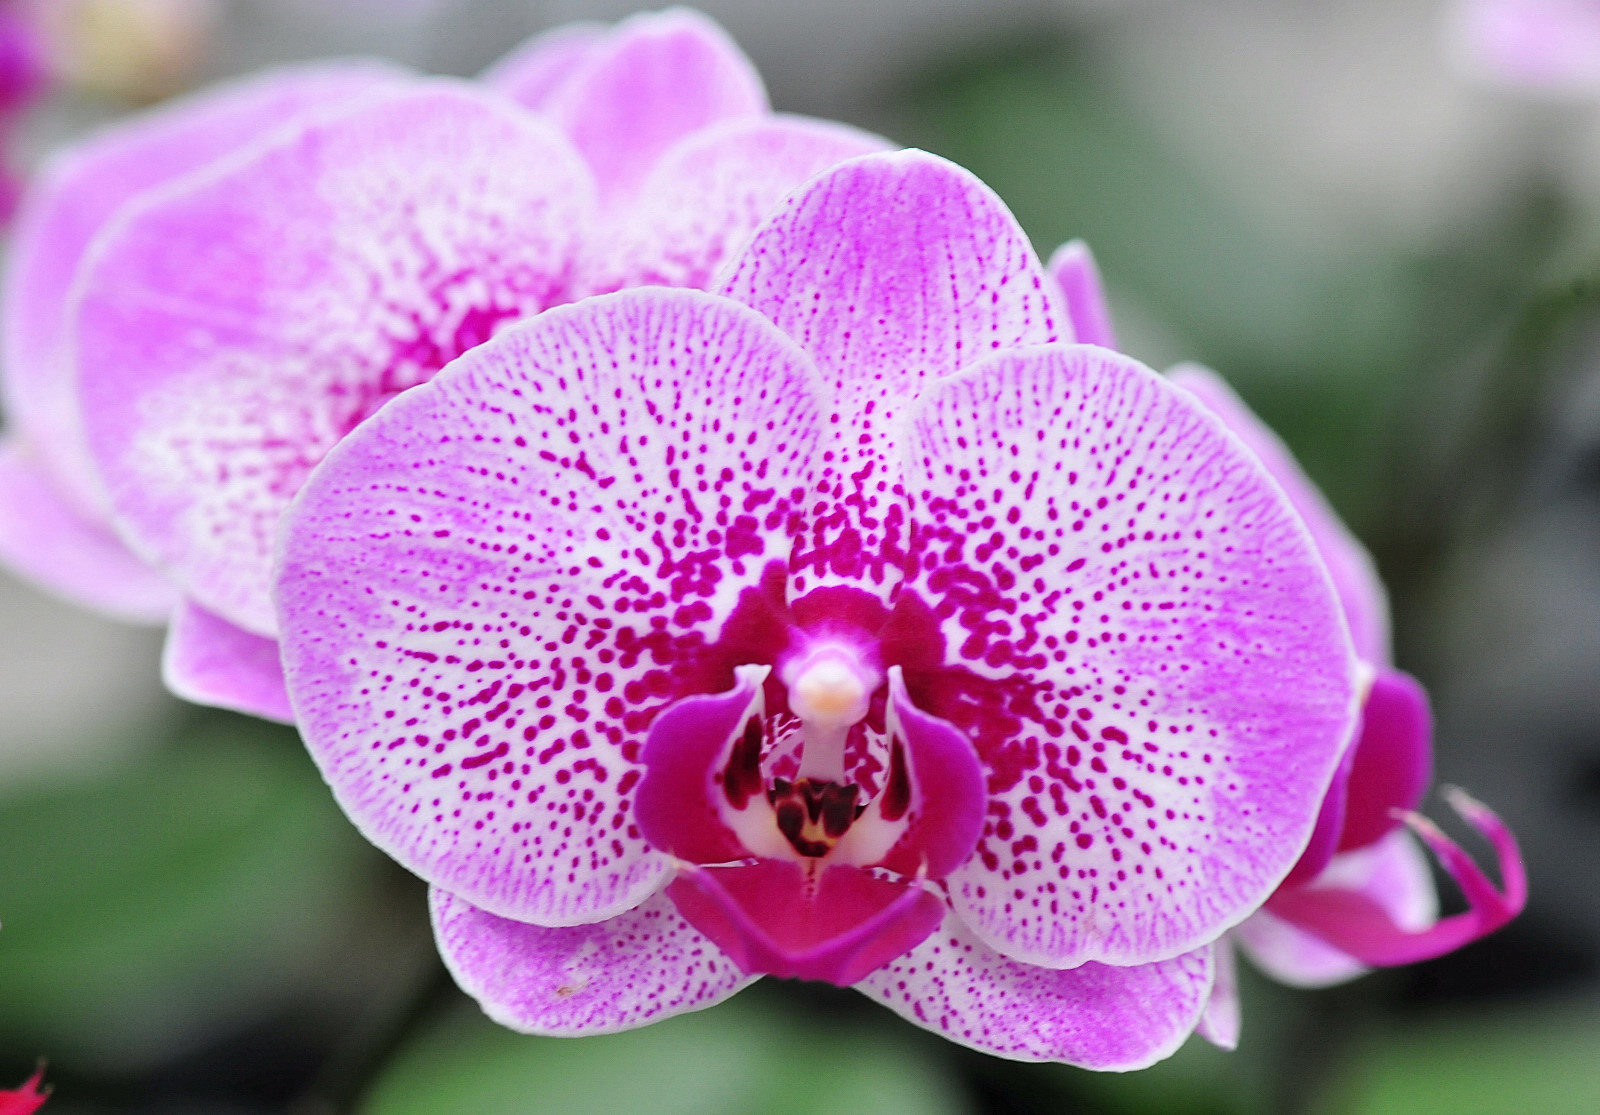 The Life Journey in Photography: Orchid @ World of Phalaenopsis, Ulu ...